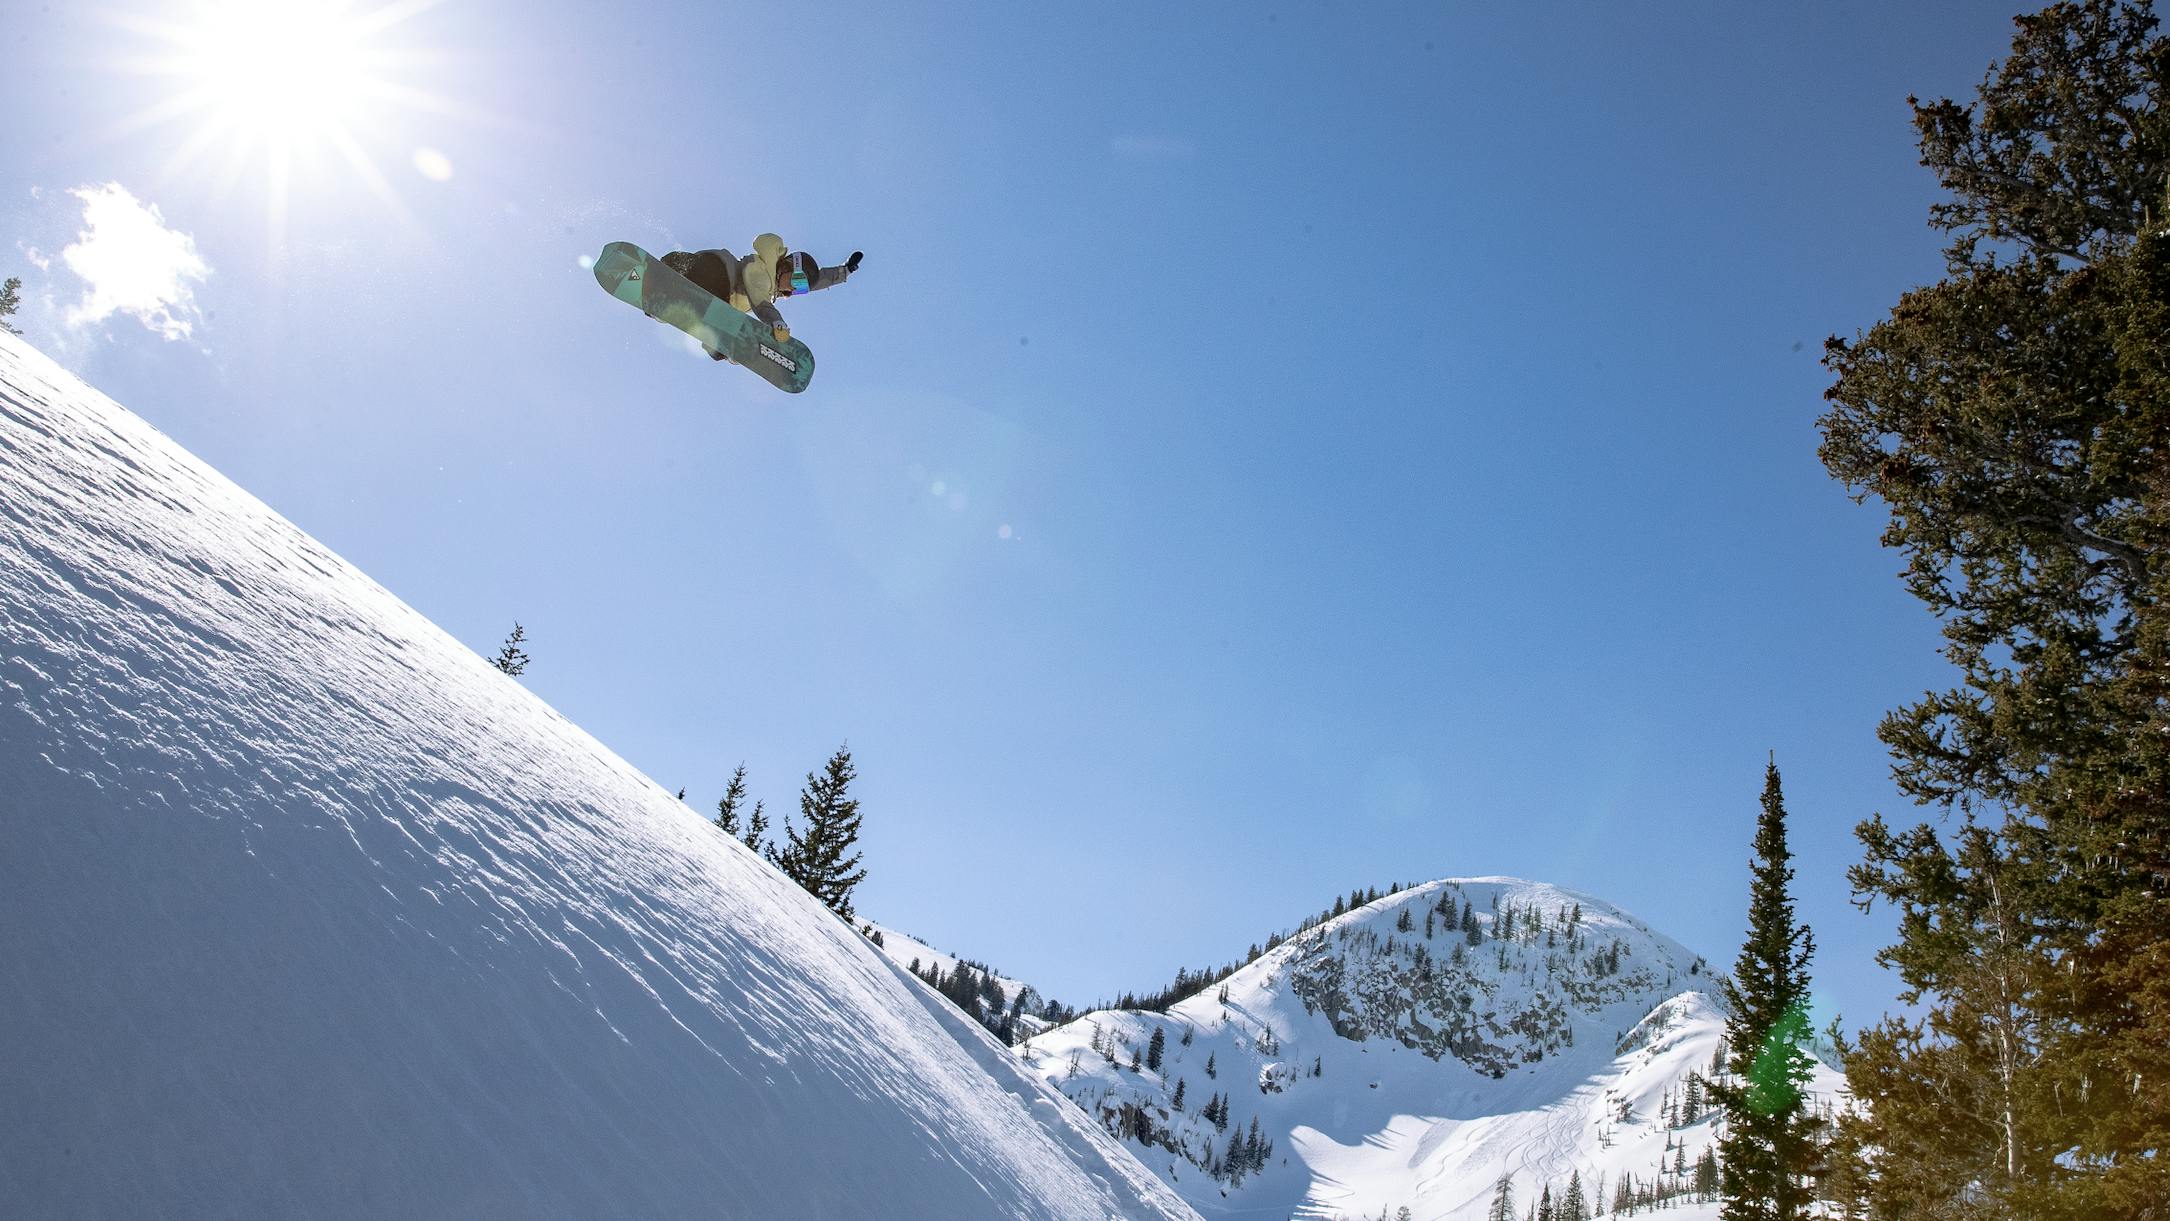 A snowboarder doing a jump off a snowy mountain. 